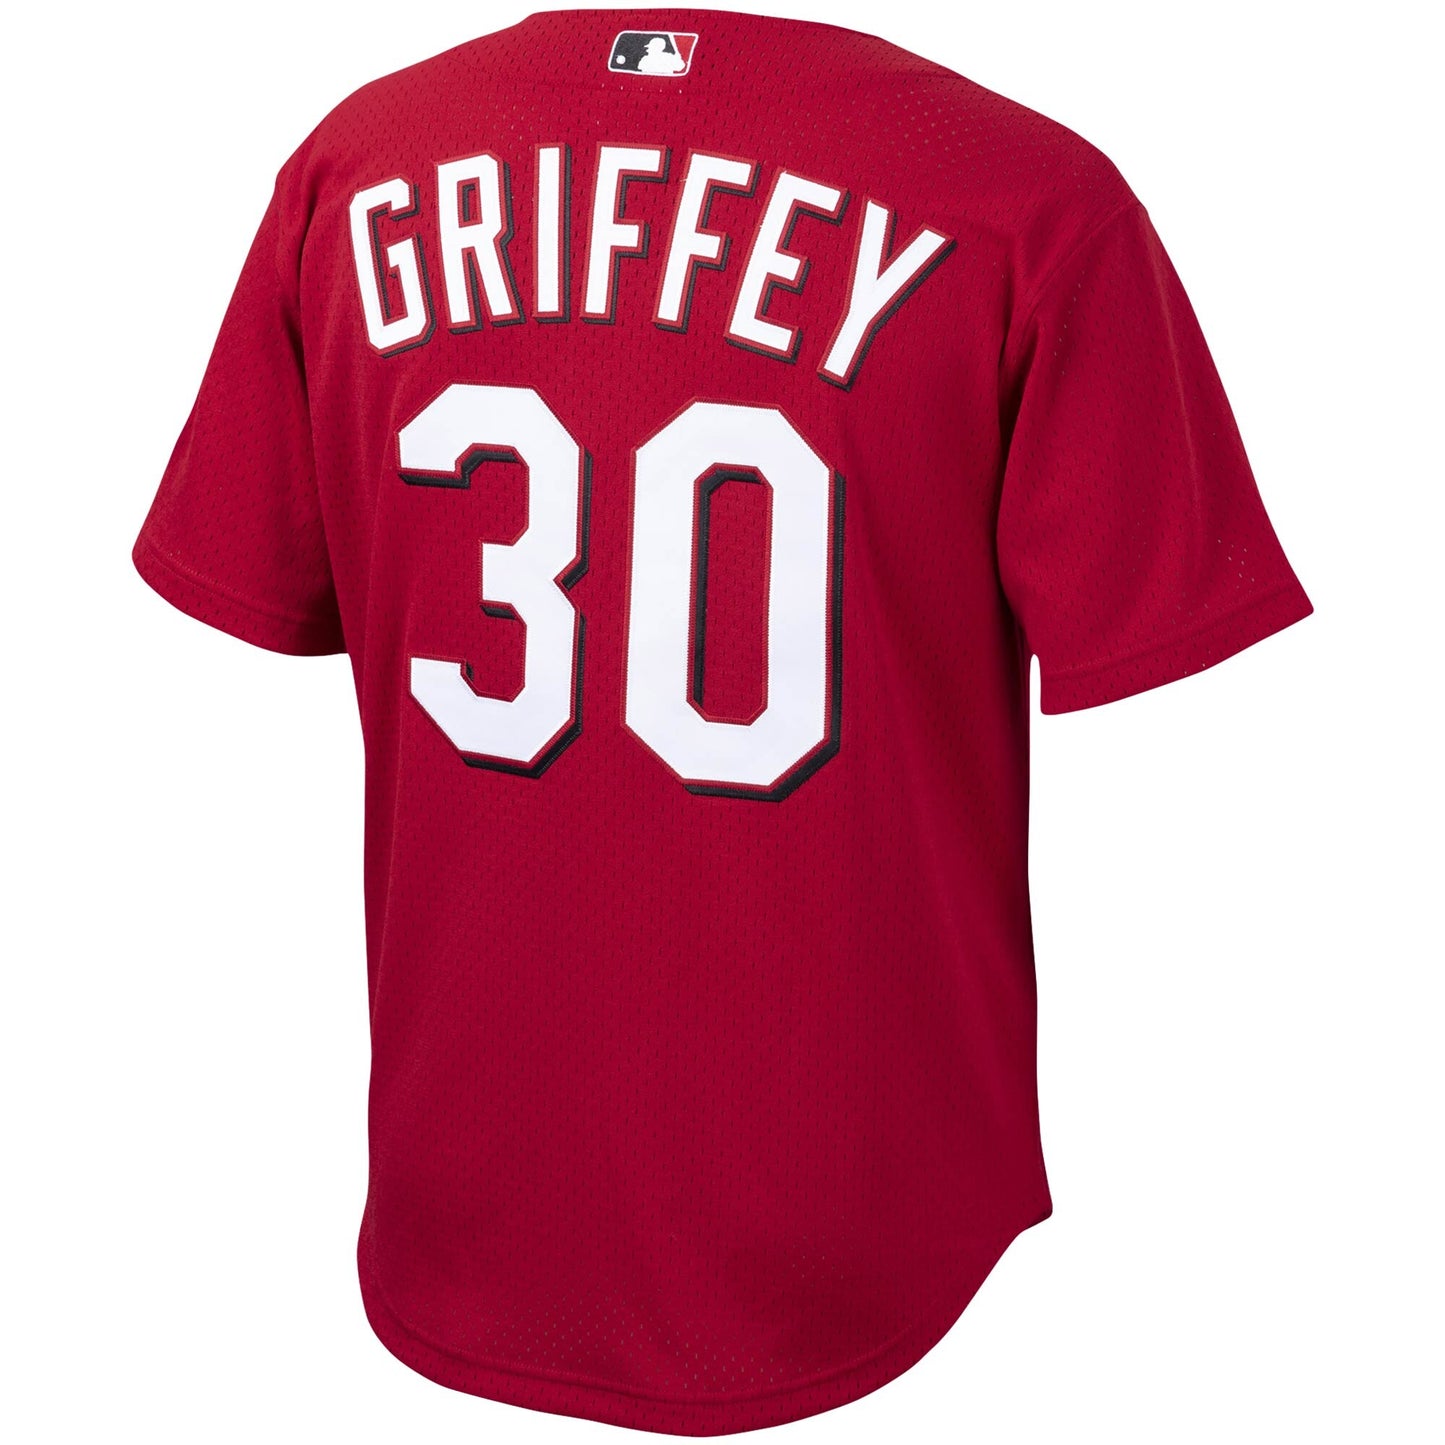 Youth Cincinnati Reds Ken Griffey Jr. Mitchell & Ness Red Cooperstown Collection Batting Practice Jersey